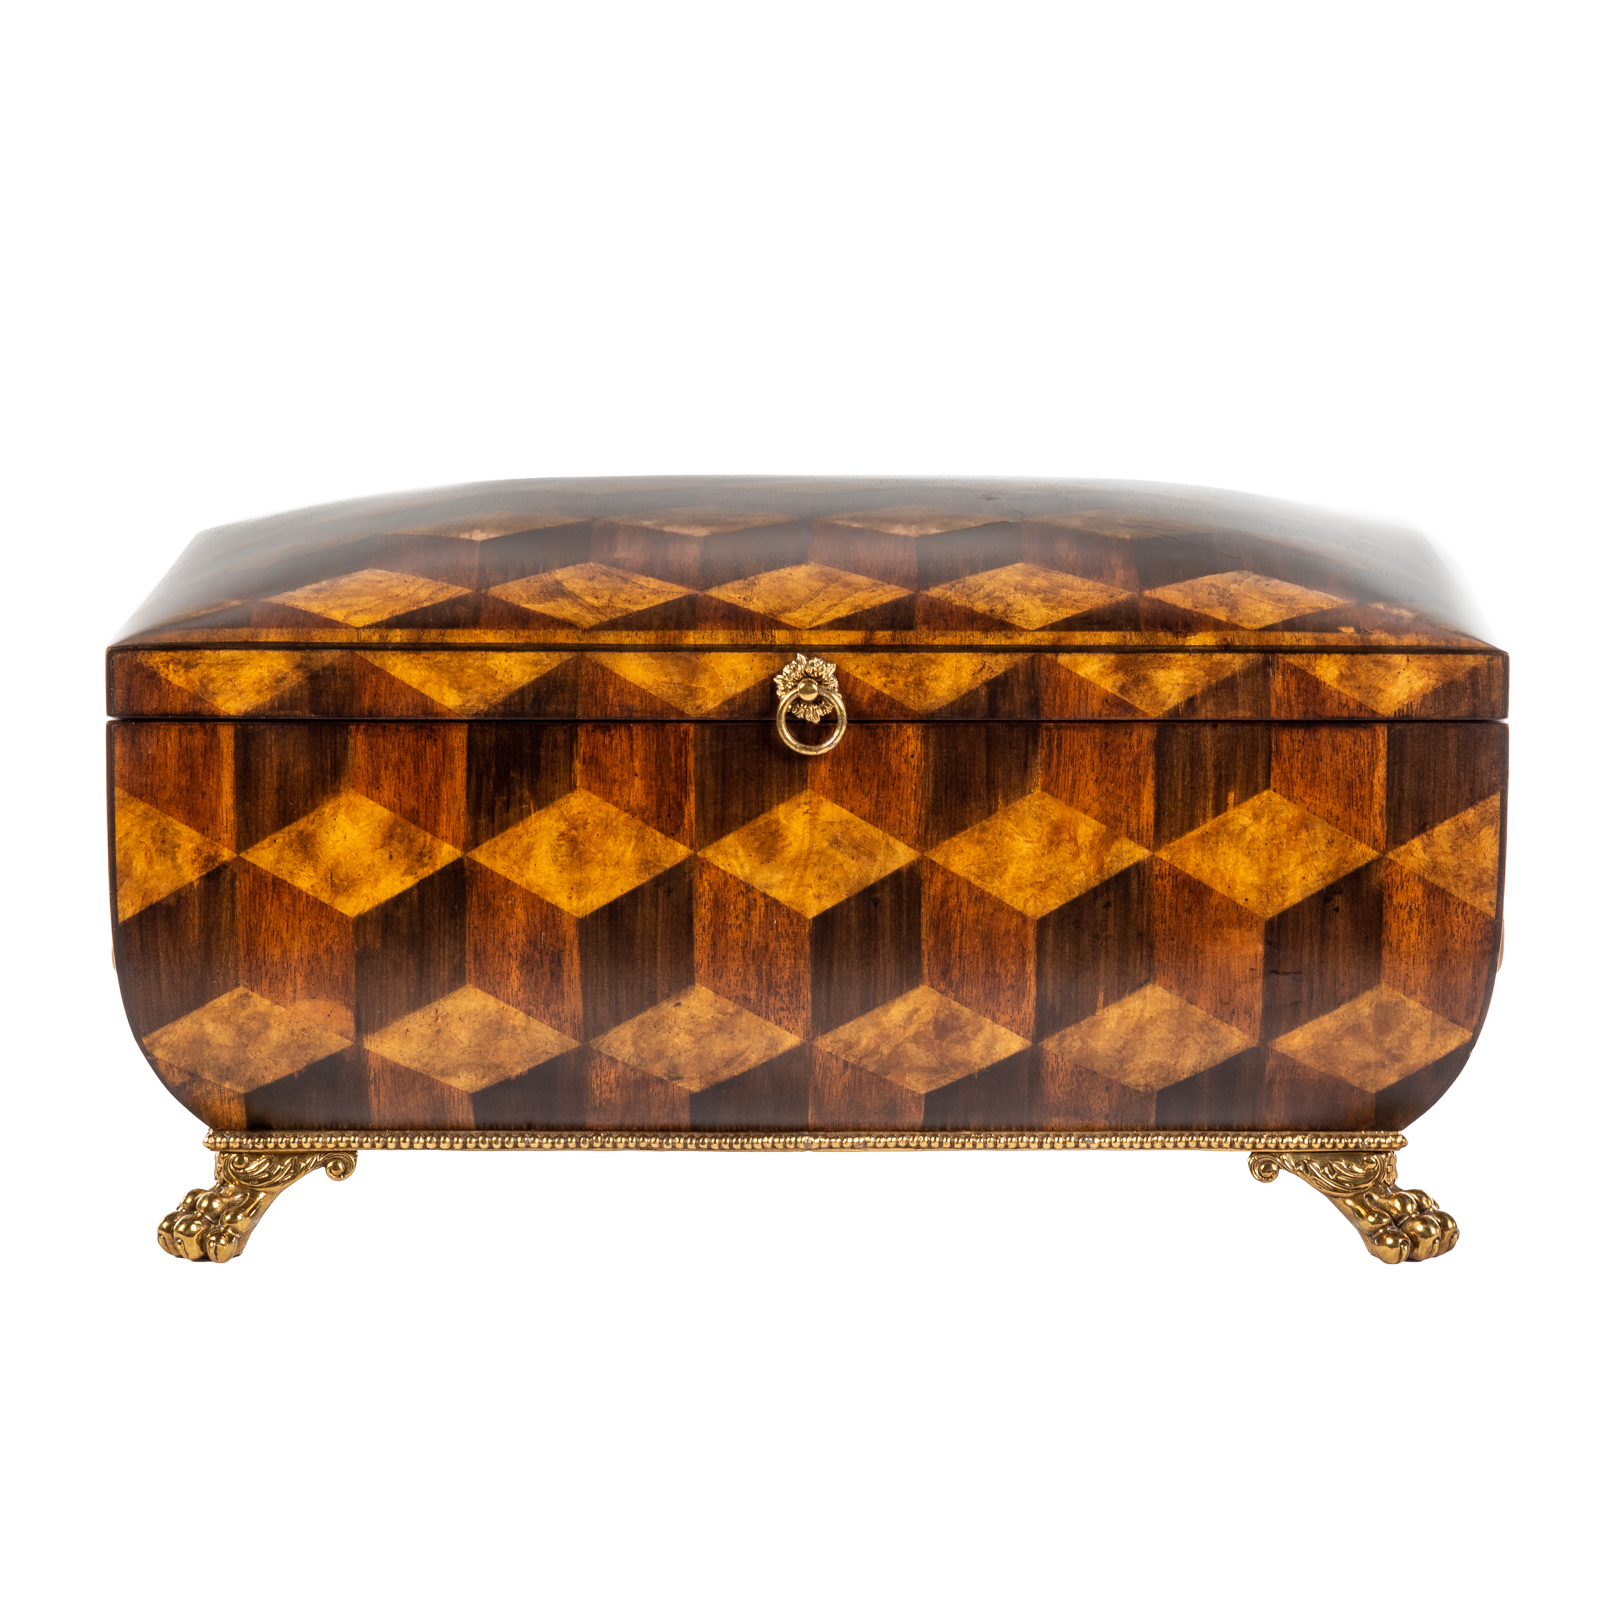 MAITLAND SMITH PARQUETRY WOOD BOX 2886a0